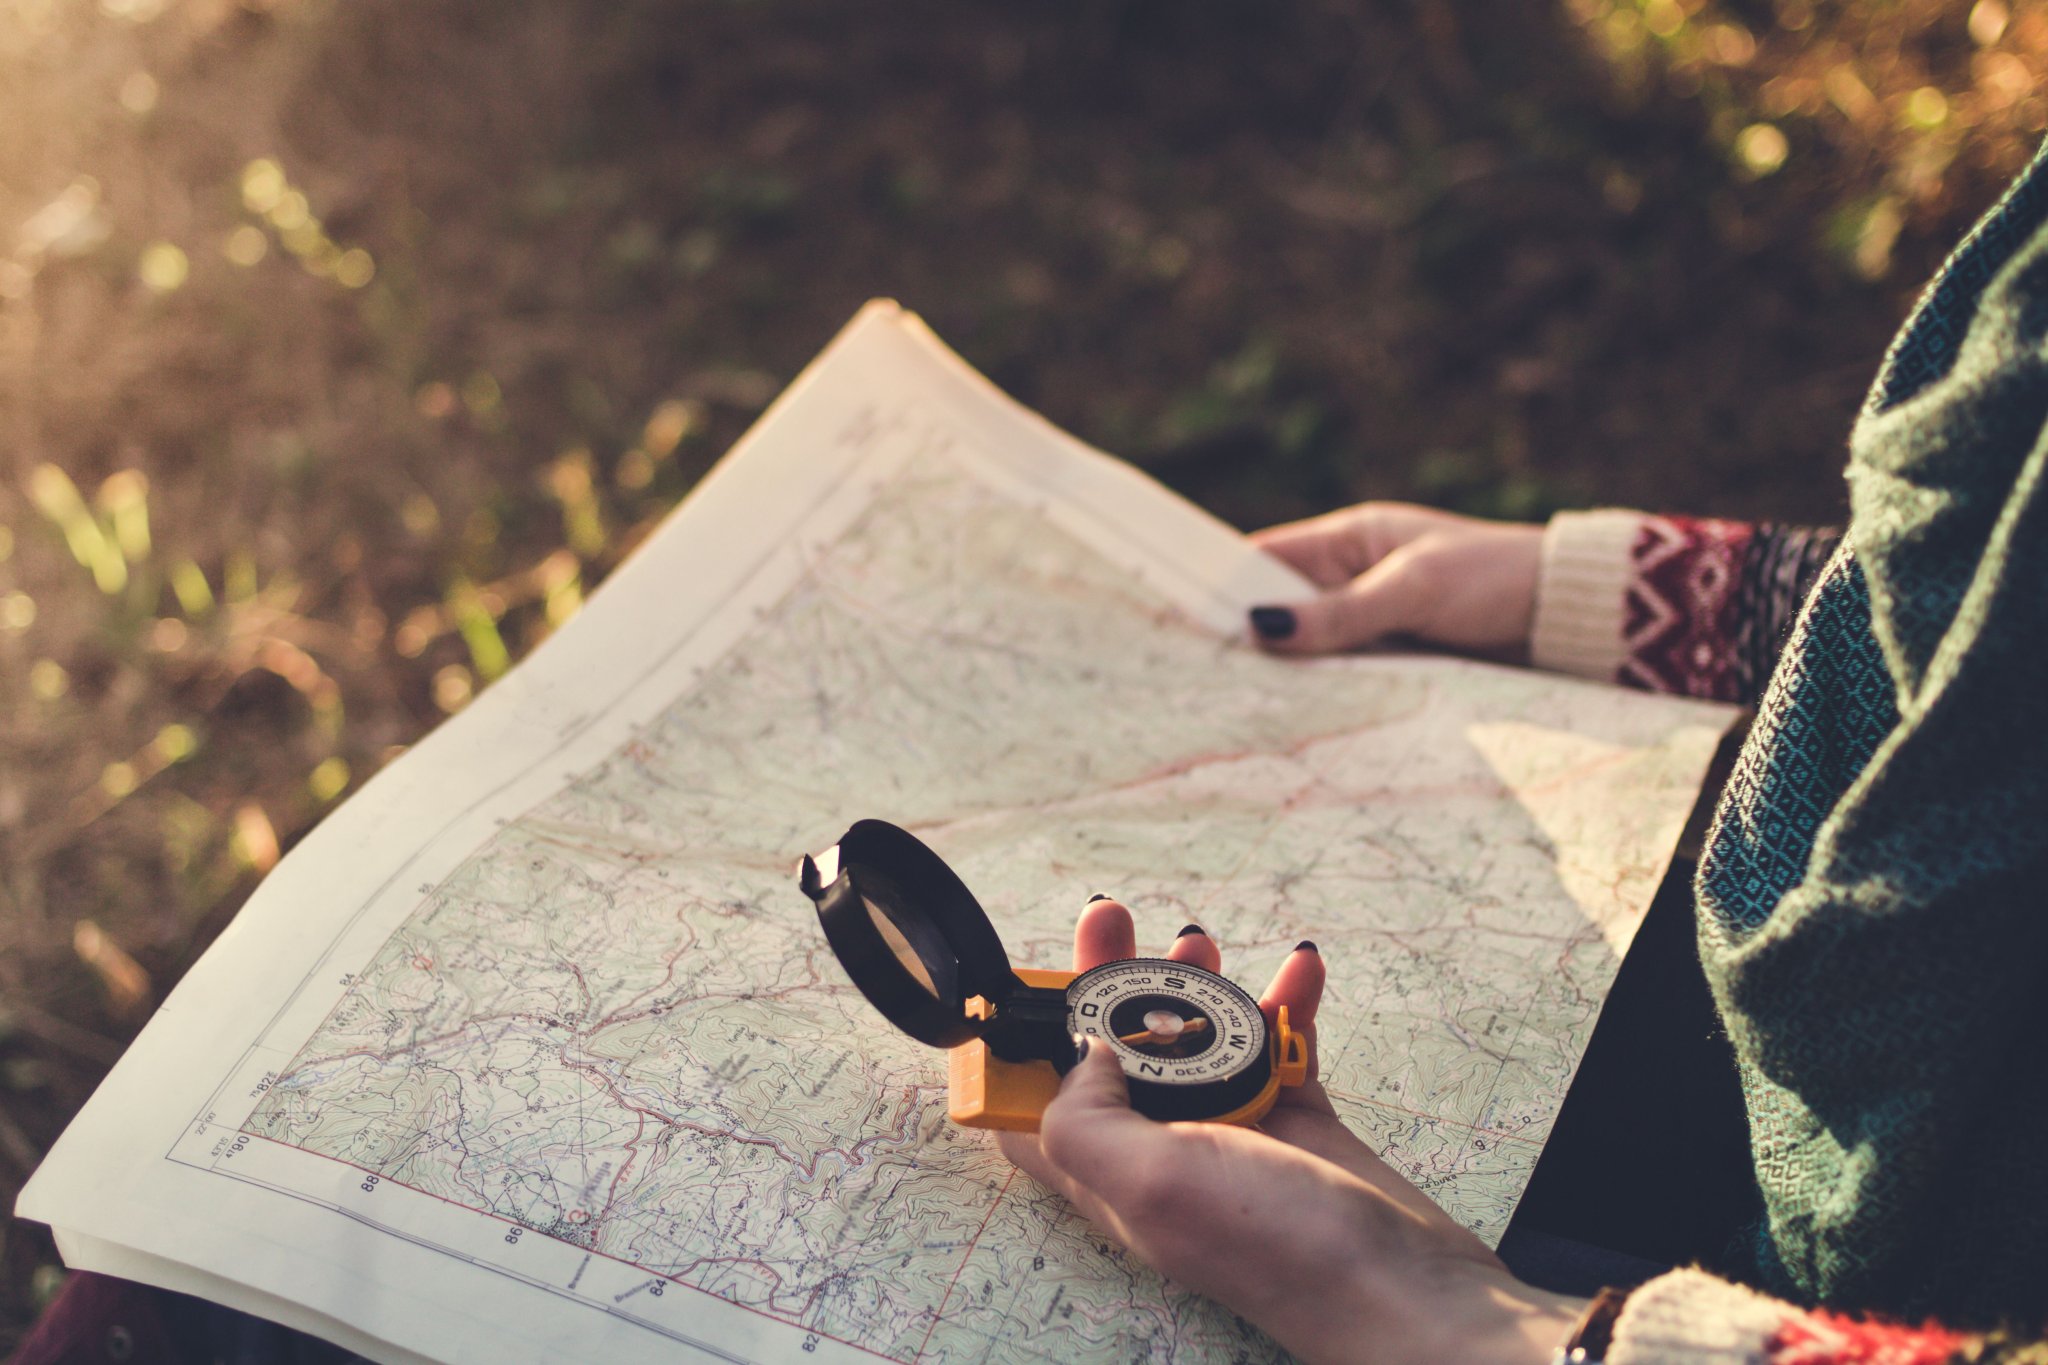 Navigation 101: Skills and Tools for Finding Your Way Outdoors